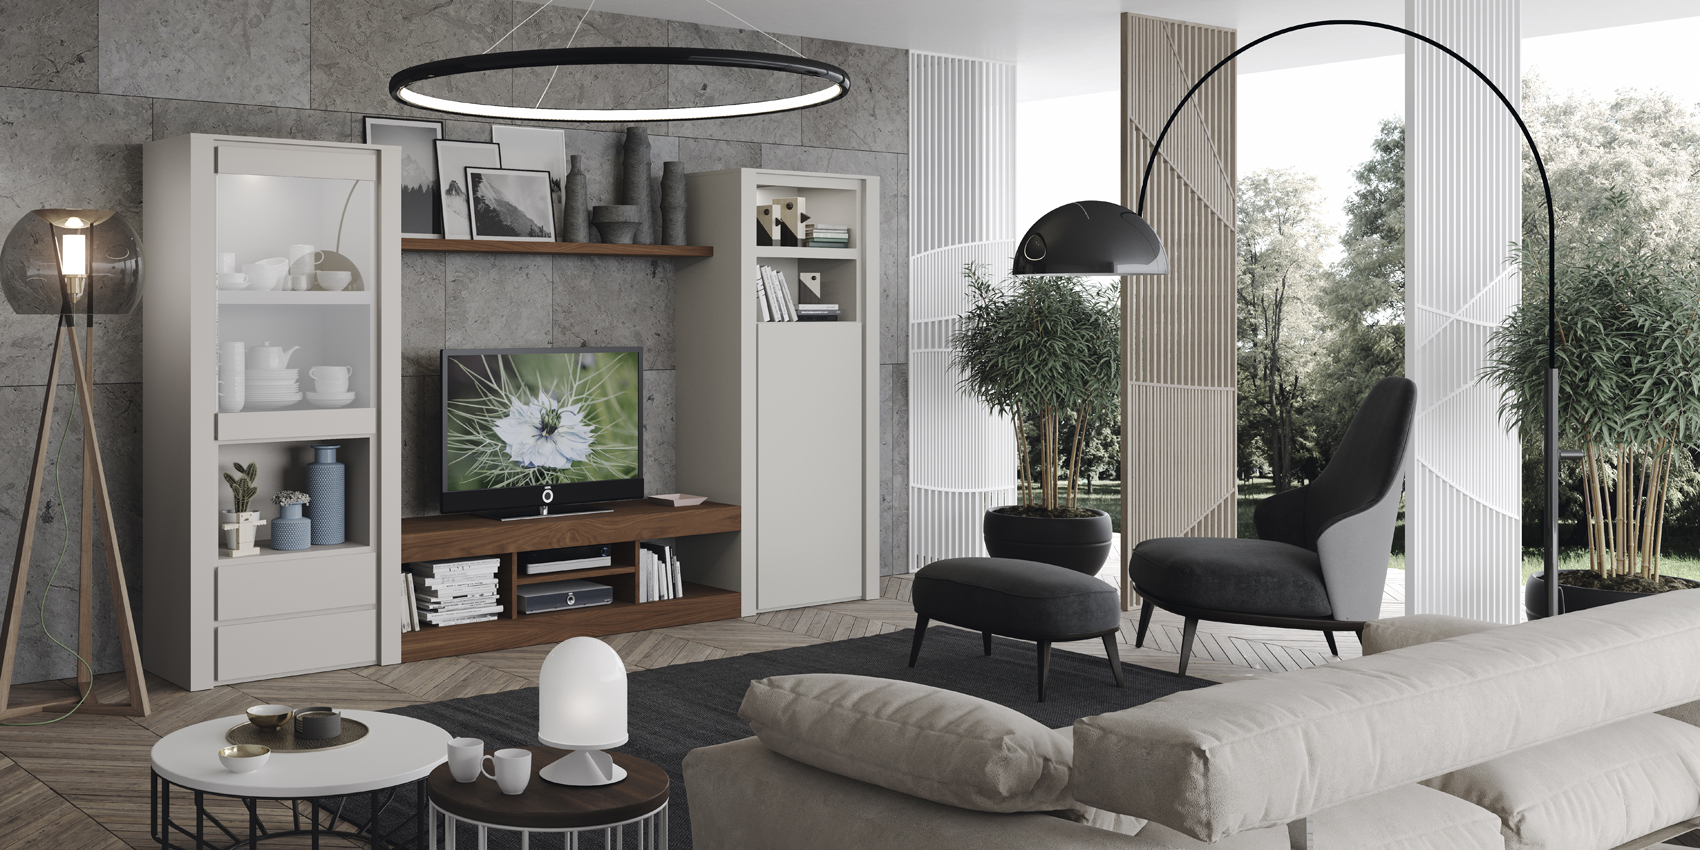 Brands MSC Modern Wall Unit, Italy Composition H2